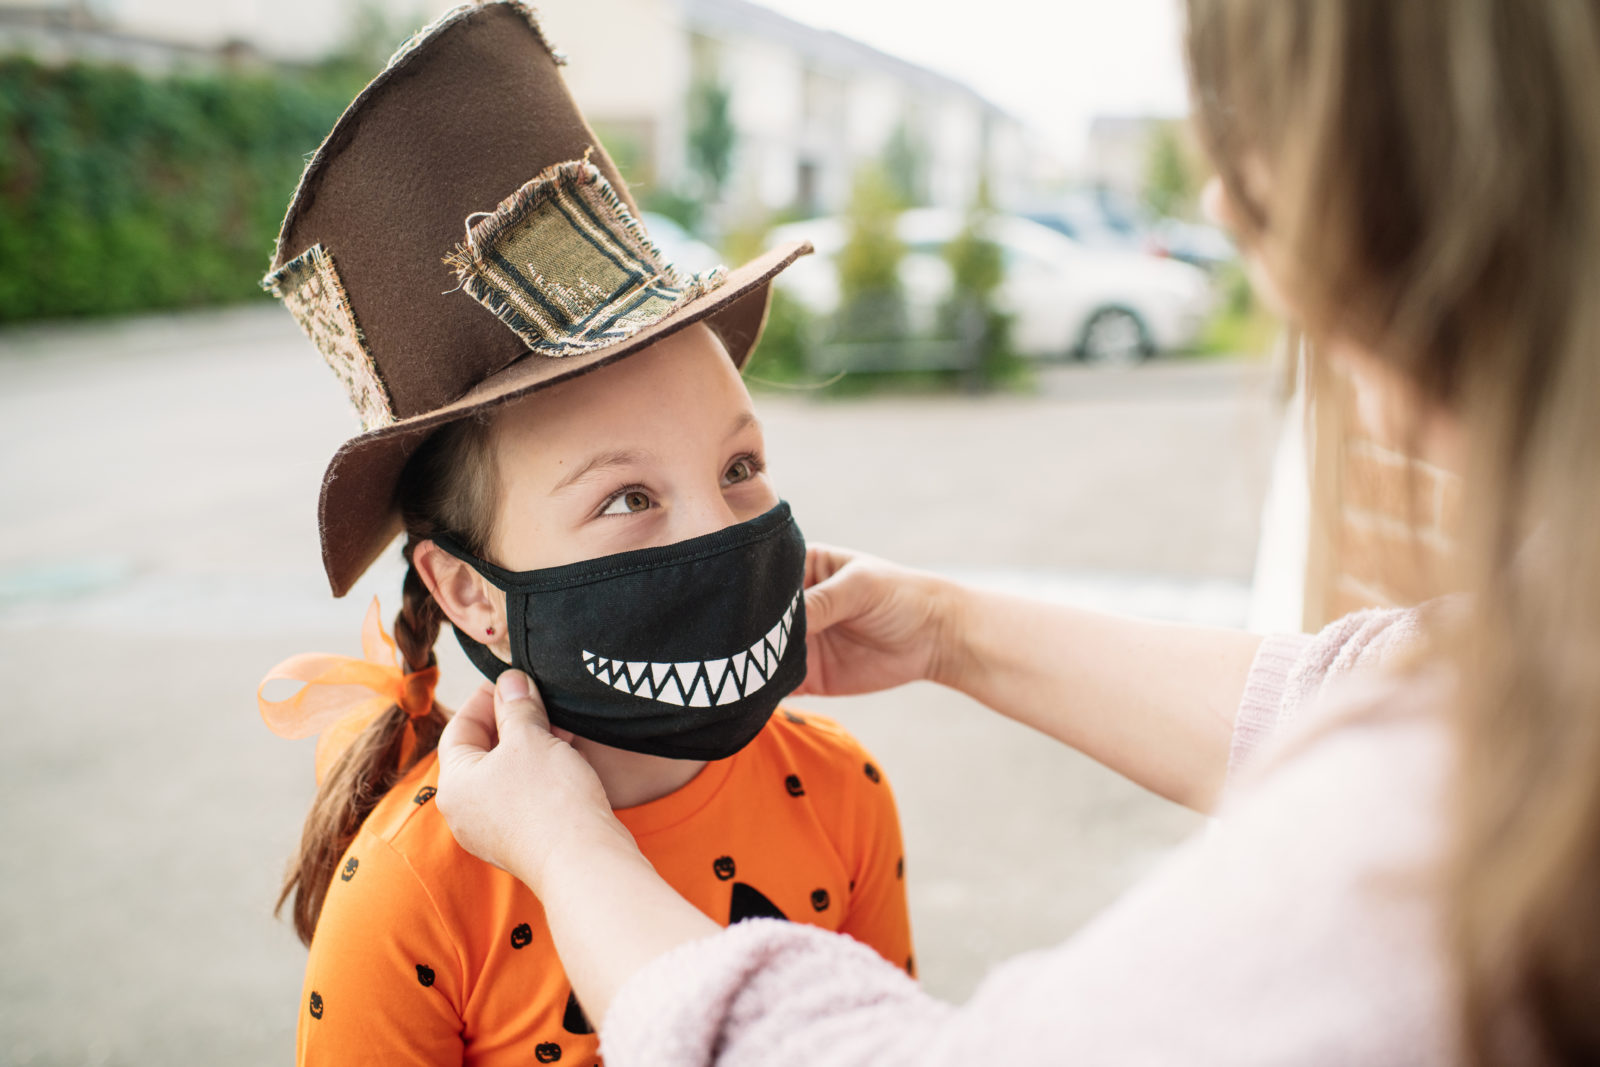 Mother putting protective face mask on her child during COVID-19 pandemic on Halloween